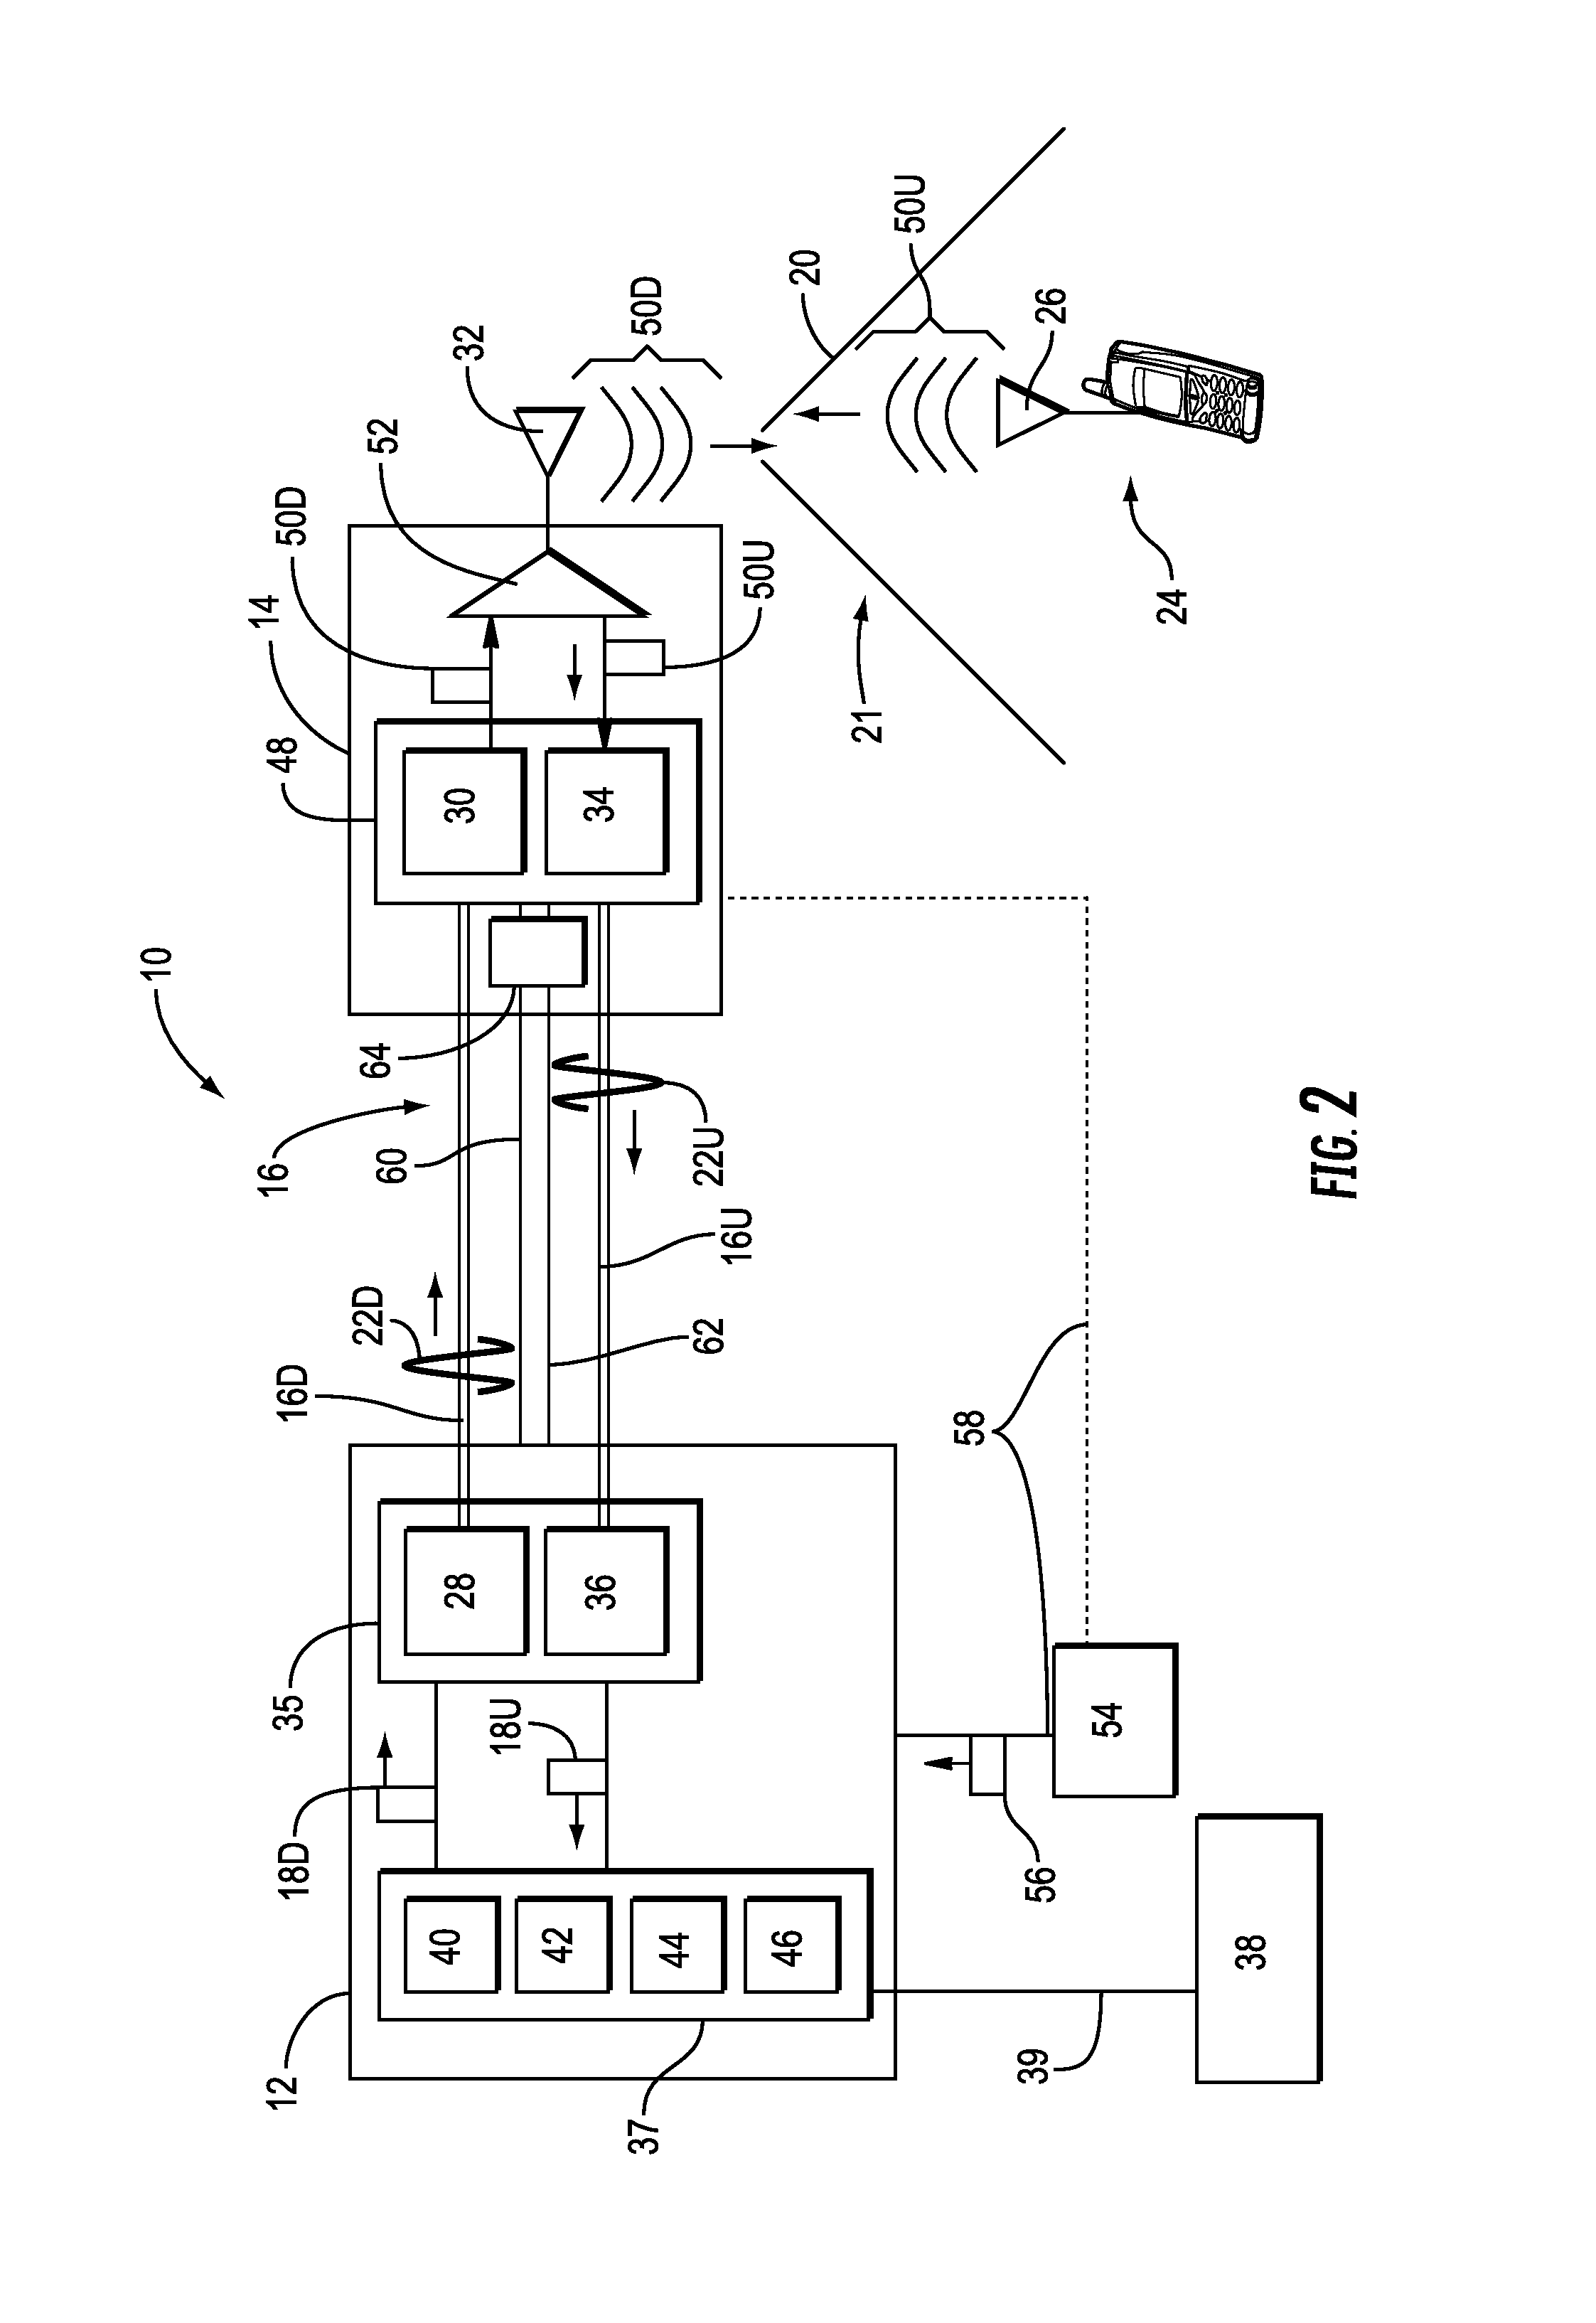 Optical fiber-based distributed radio frequency (RF) antenna systems supporting multiple-input, multiple-output (MIMO) configurations, and related components and methods